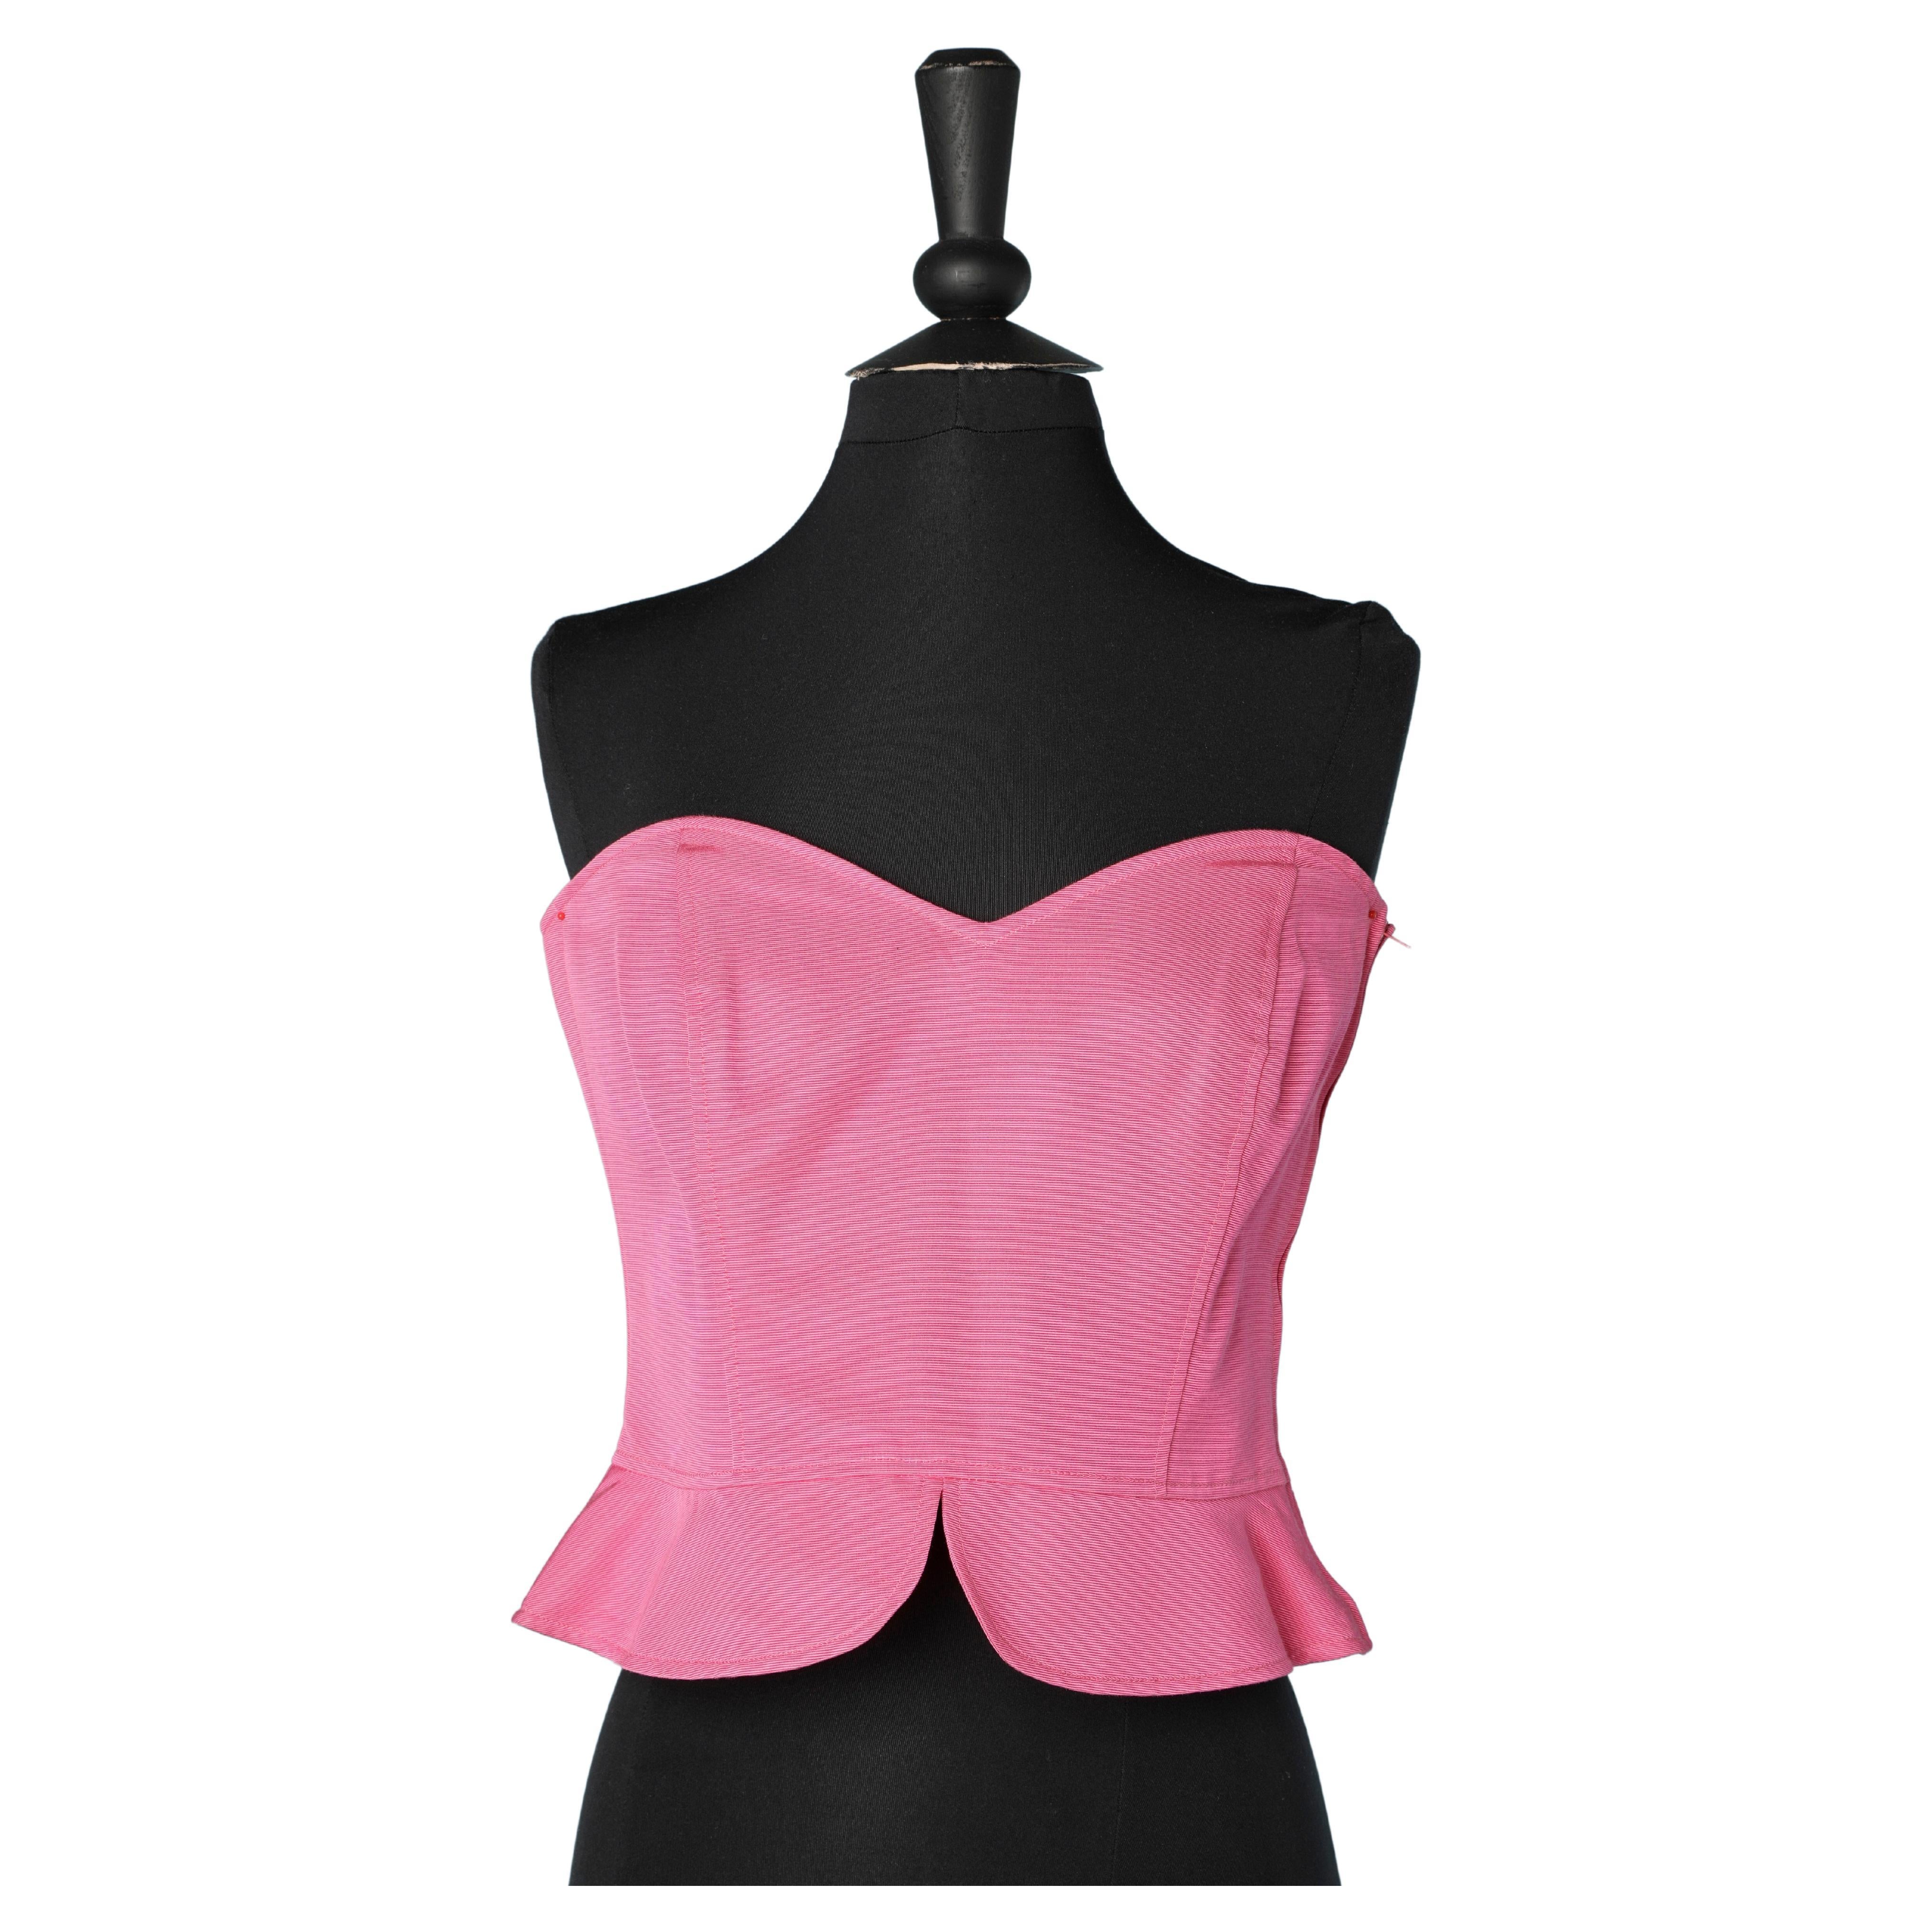 Pink cotton & rayon boned bustier UNGARO SOLO DONNA New with tag